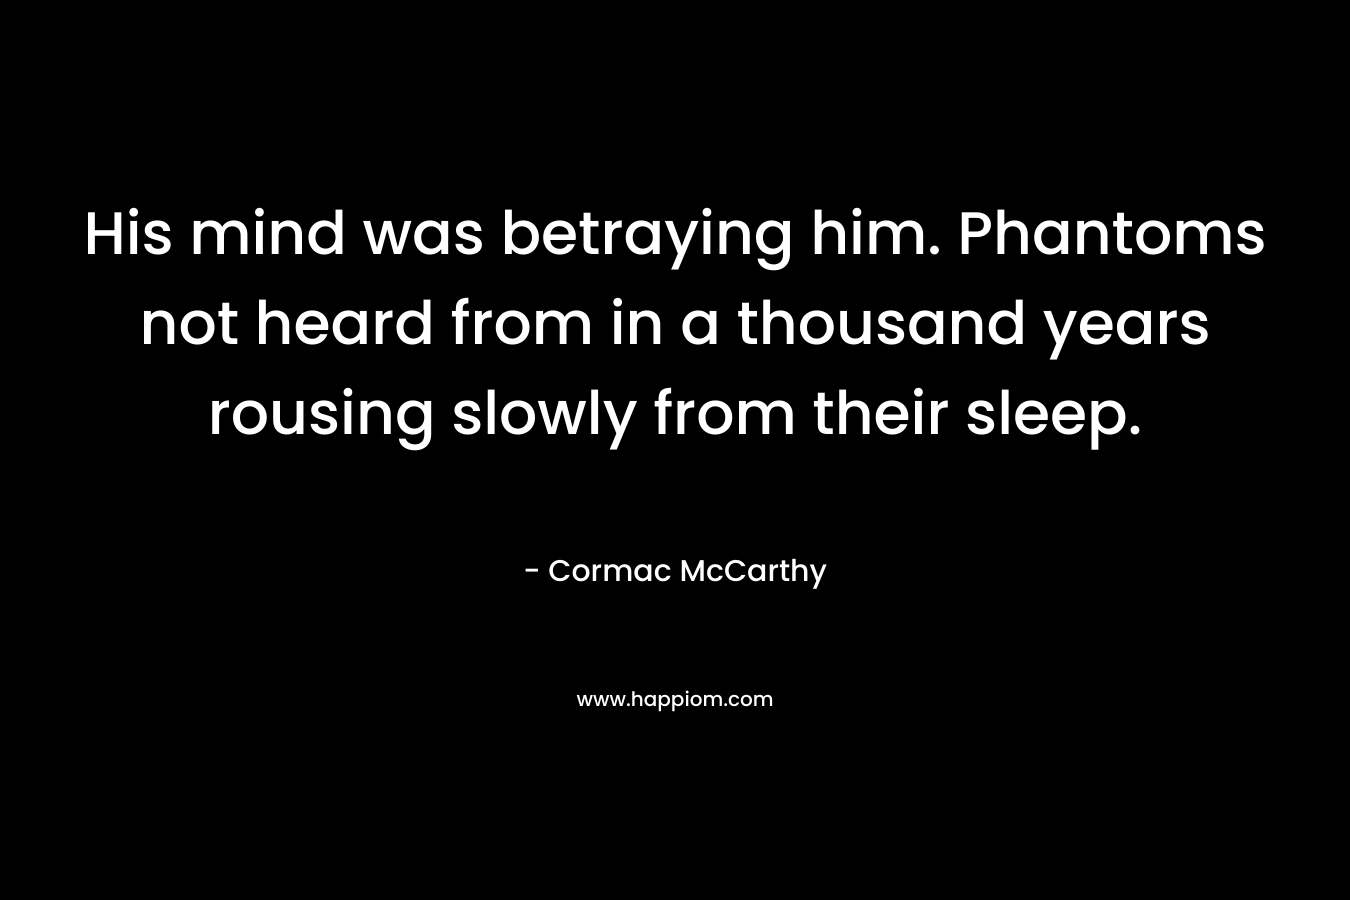 His mind was betraying him. Phantoms not heard from in a thousand years rousing slowly from their sleep. – Cormac McCarthy